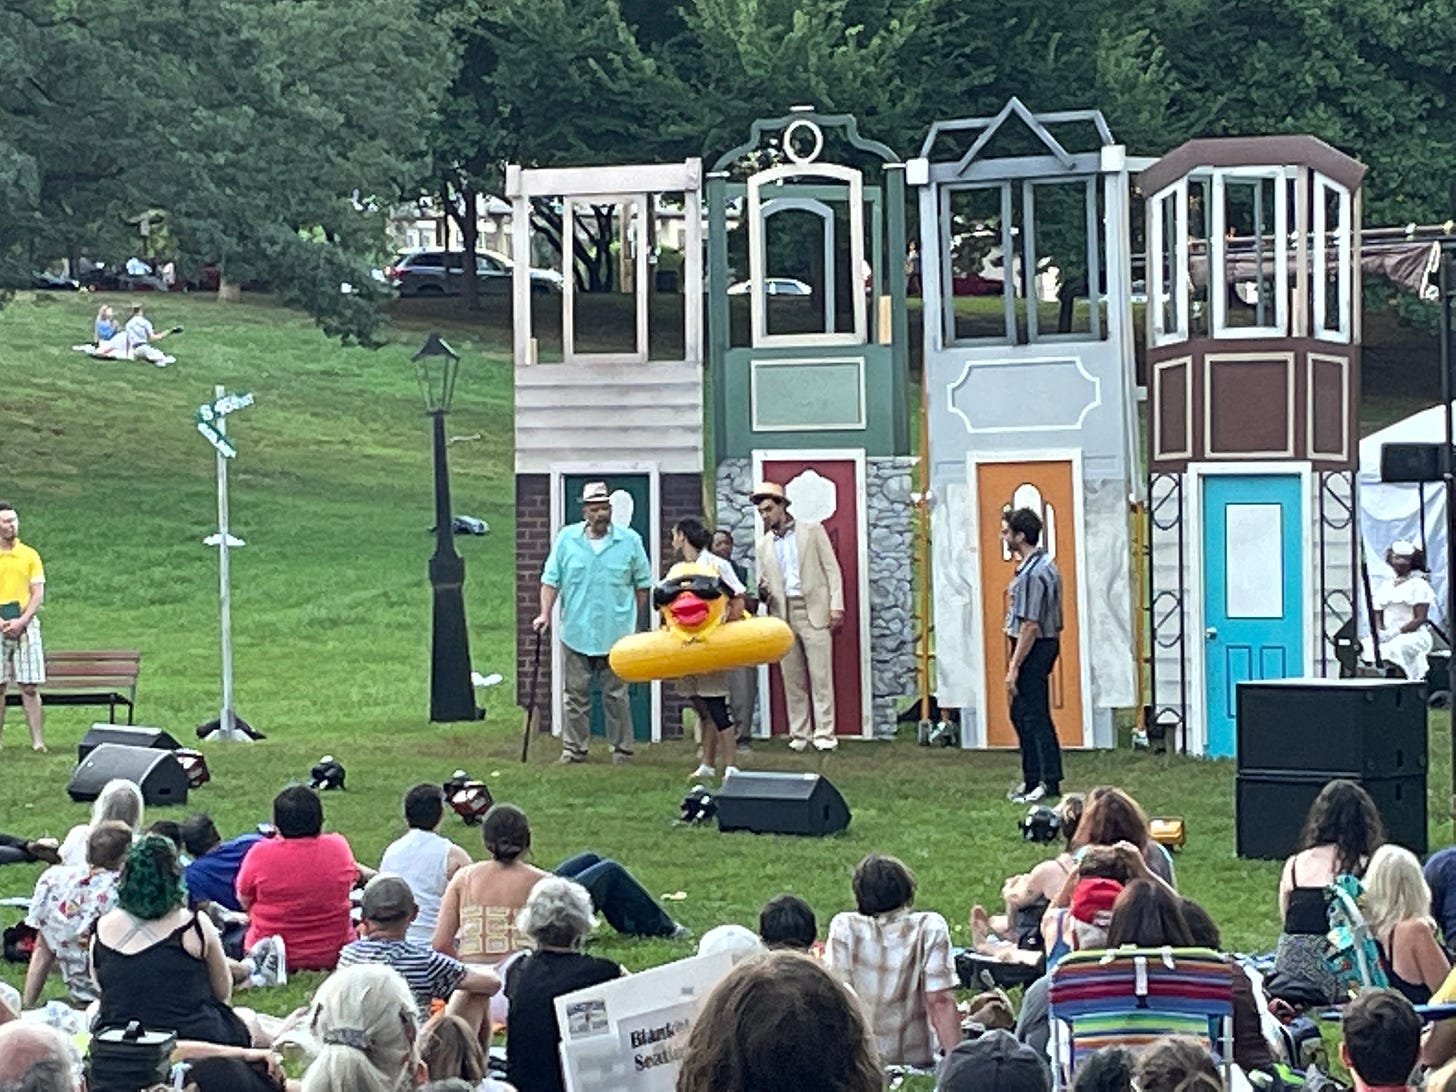 Shakespeare in the park.